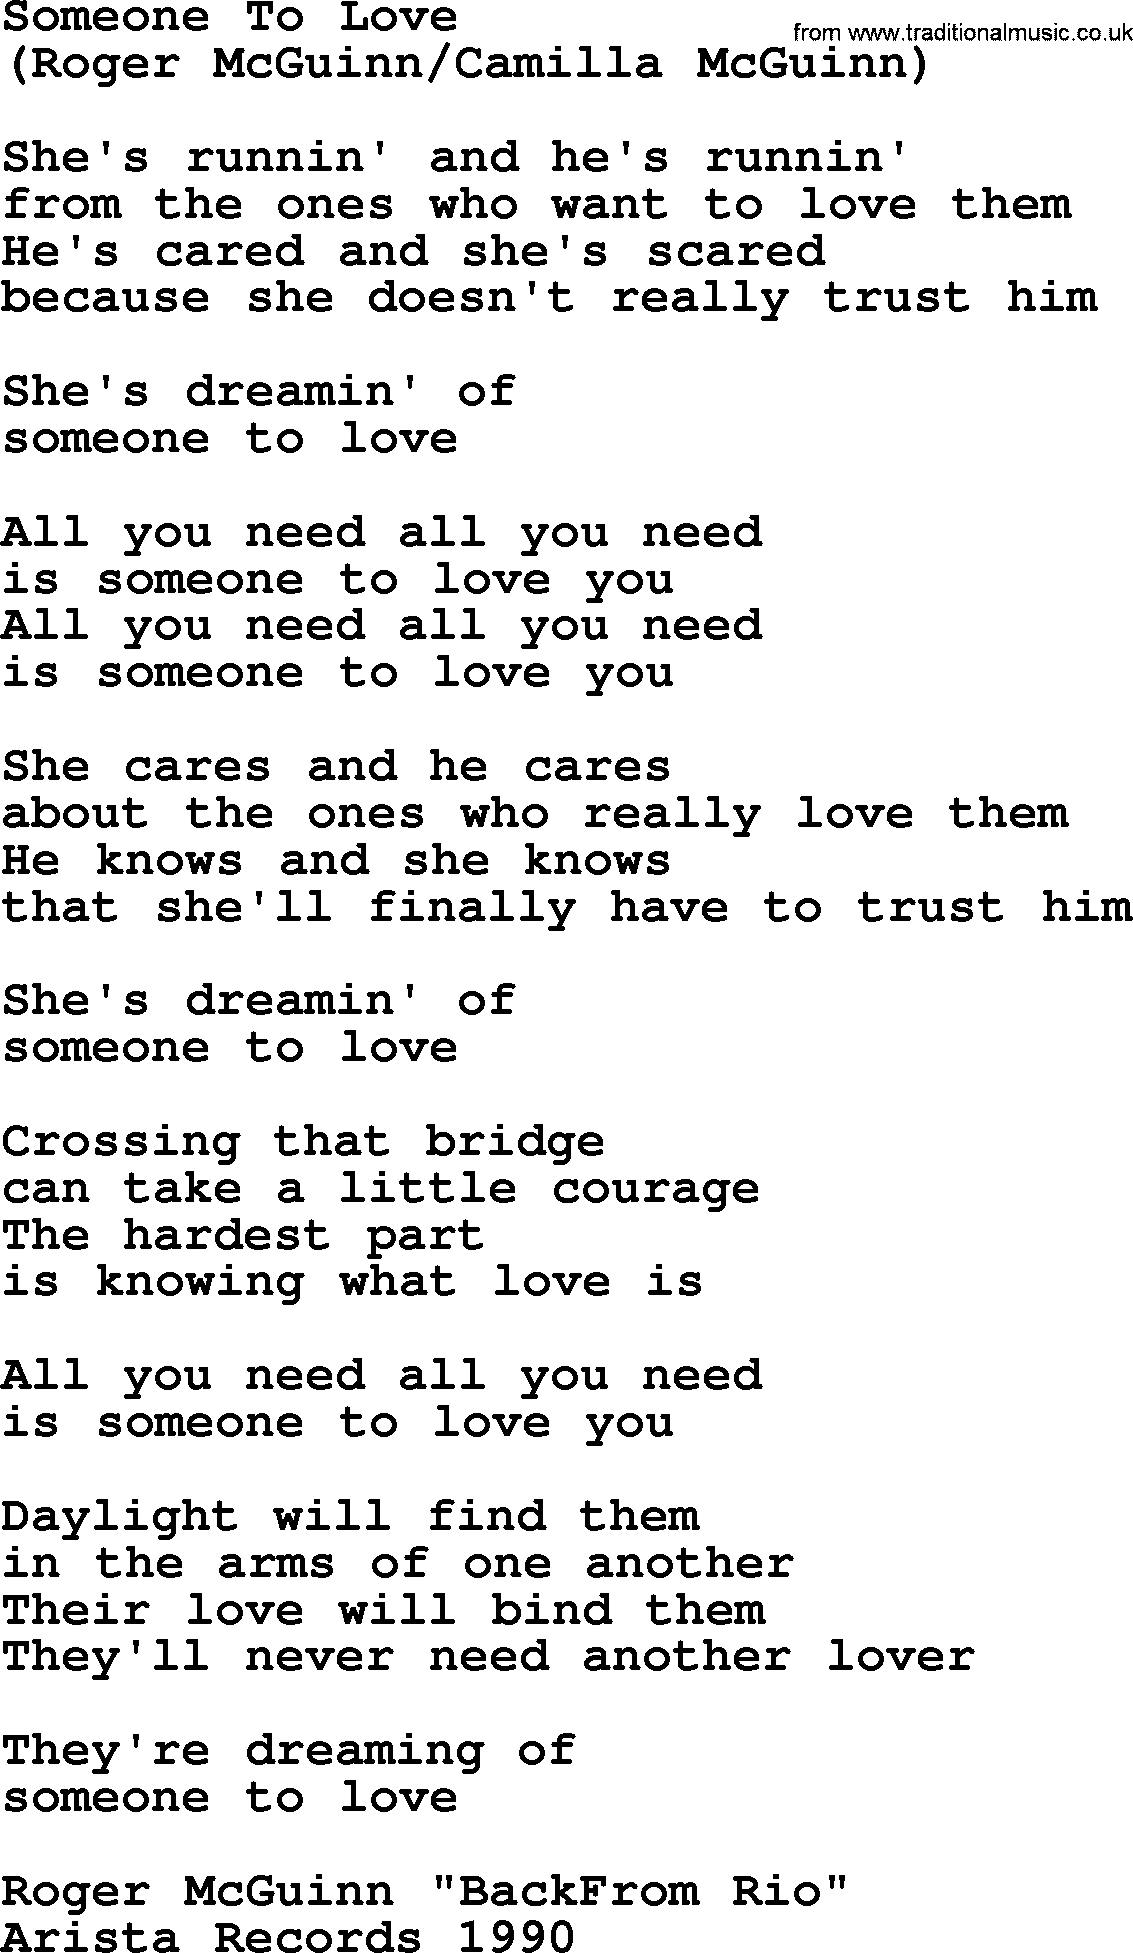 The Byrds song Someone To Love, lyrics